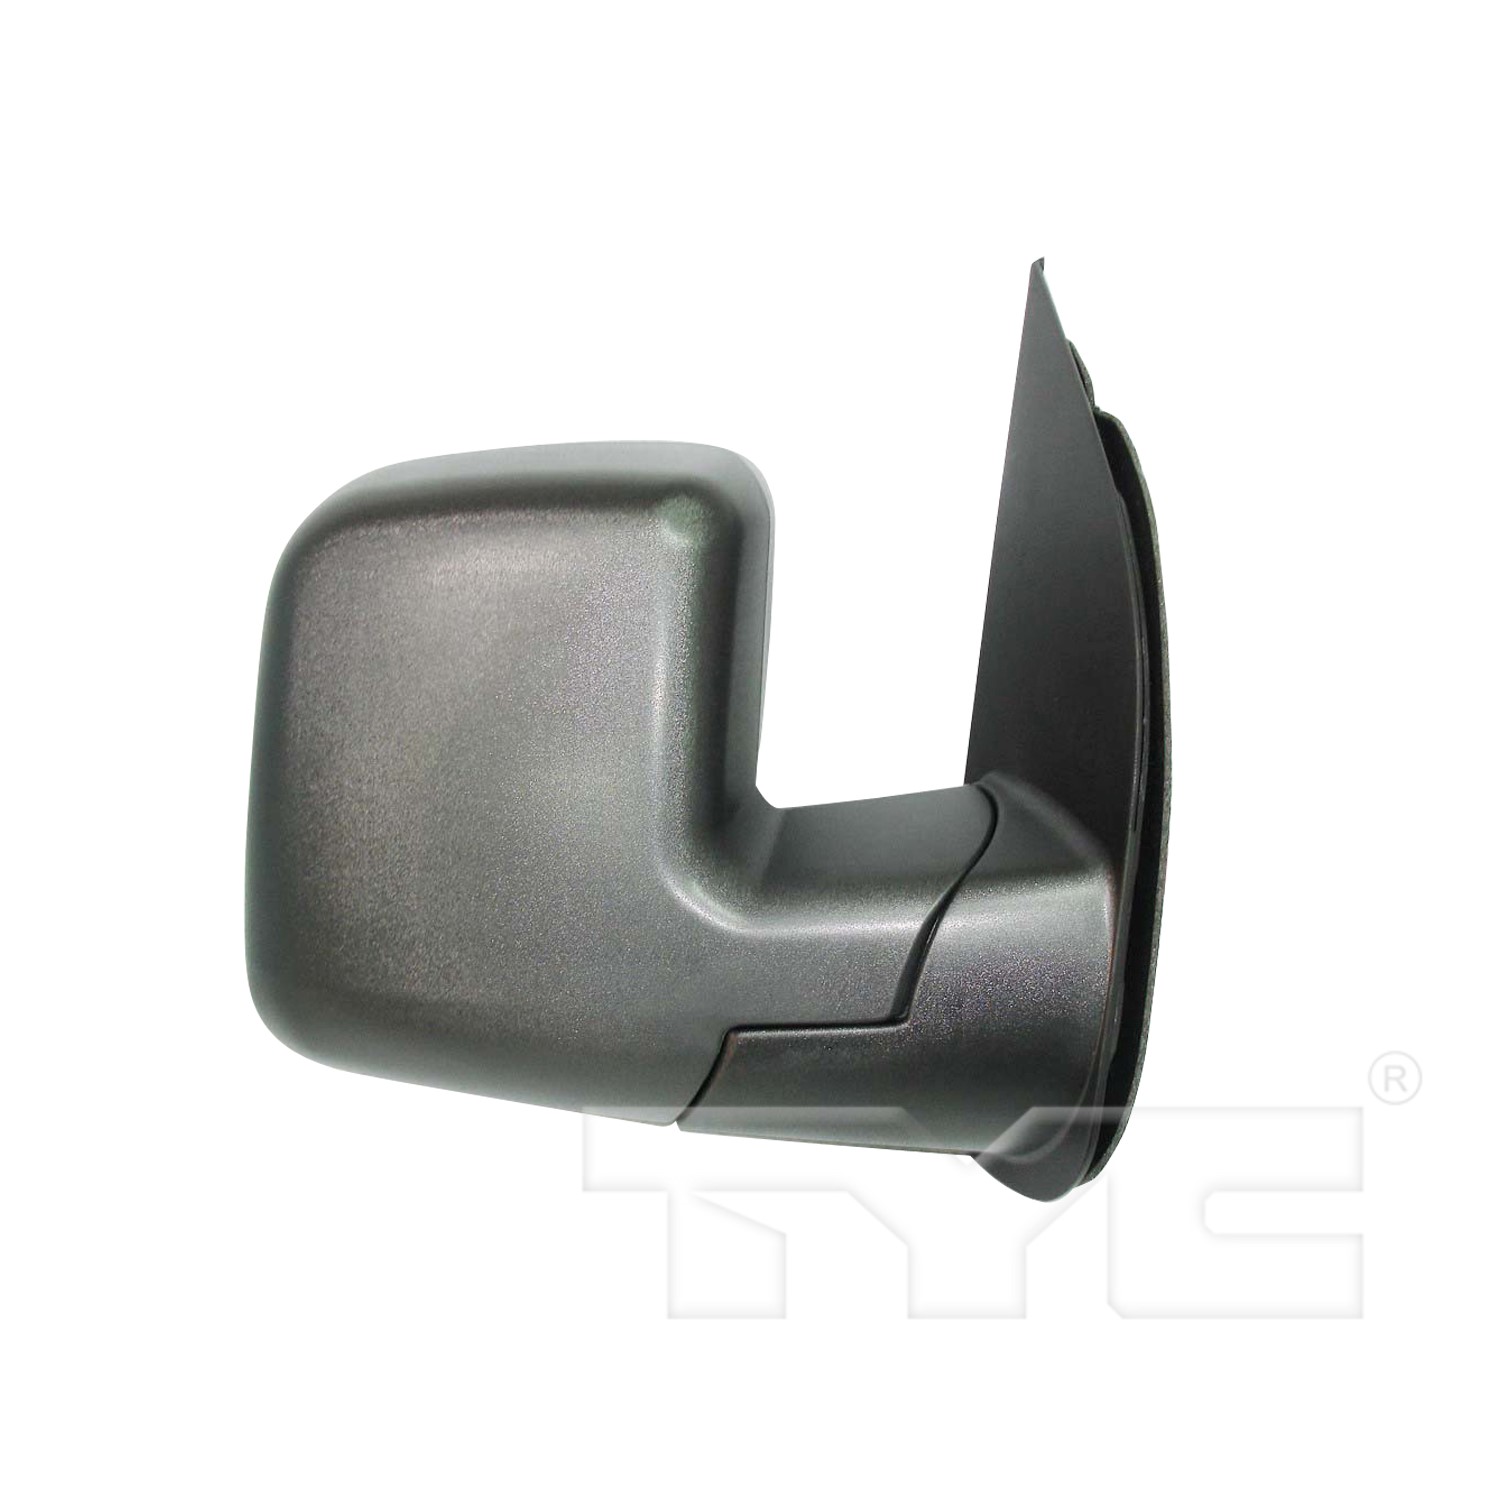 Aftermarket MIRRORS for FORD - E-350 ECONOLINE CLUB WAGON, E-350 ECONOLINE CLUB WAGON,02-02,RT Mirror outside rear view